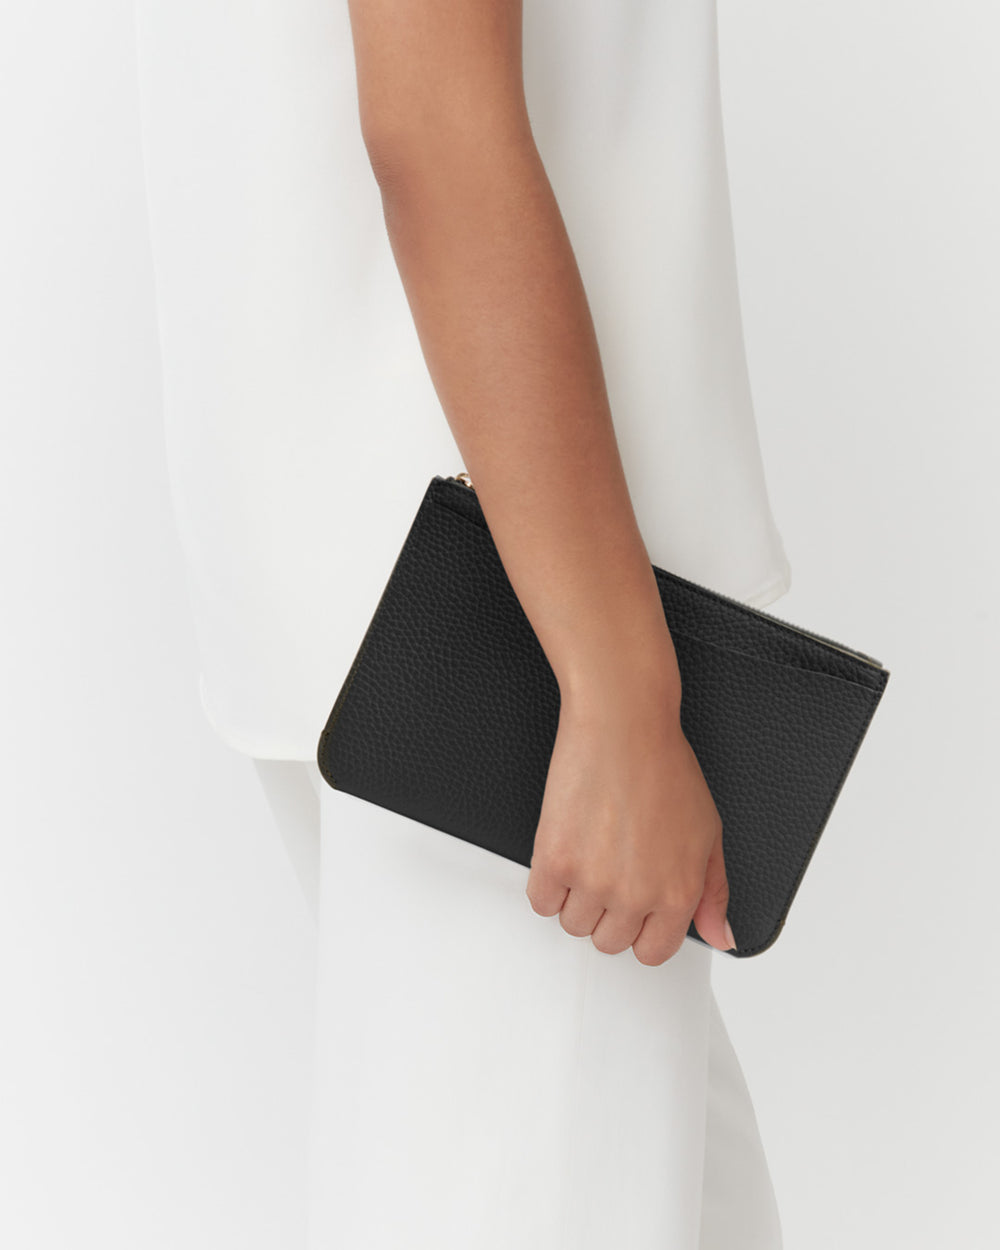 Person holding a clutch bag by their side.